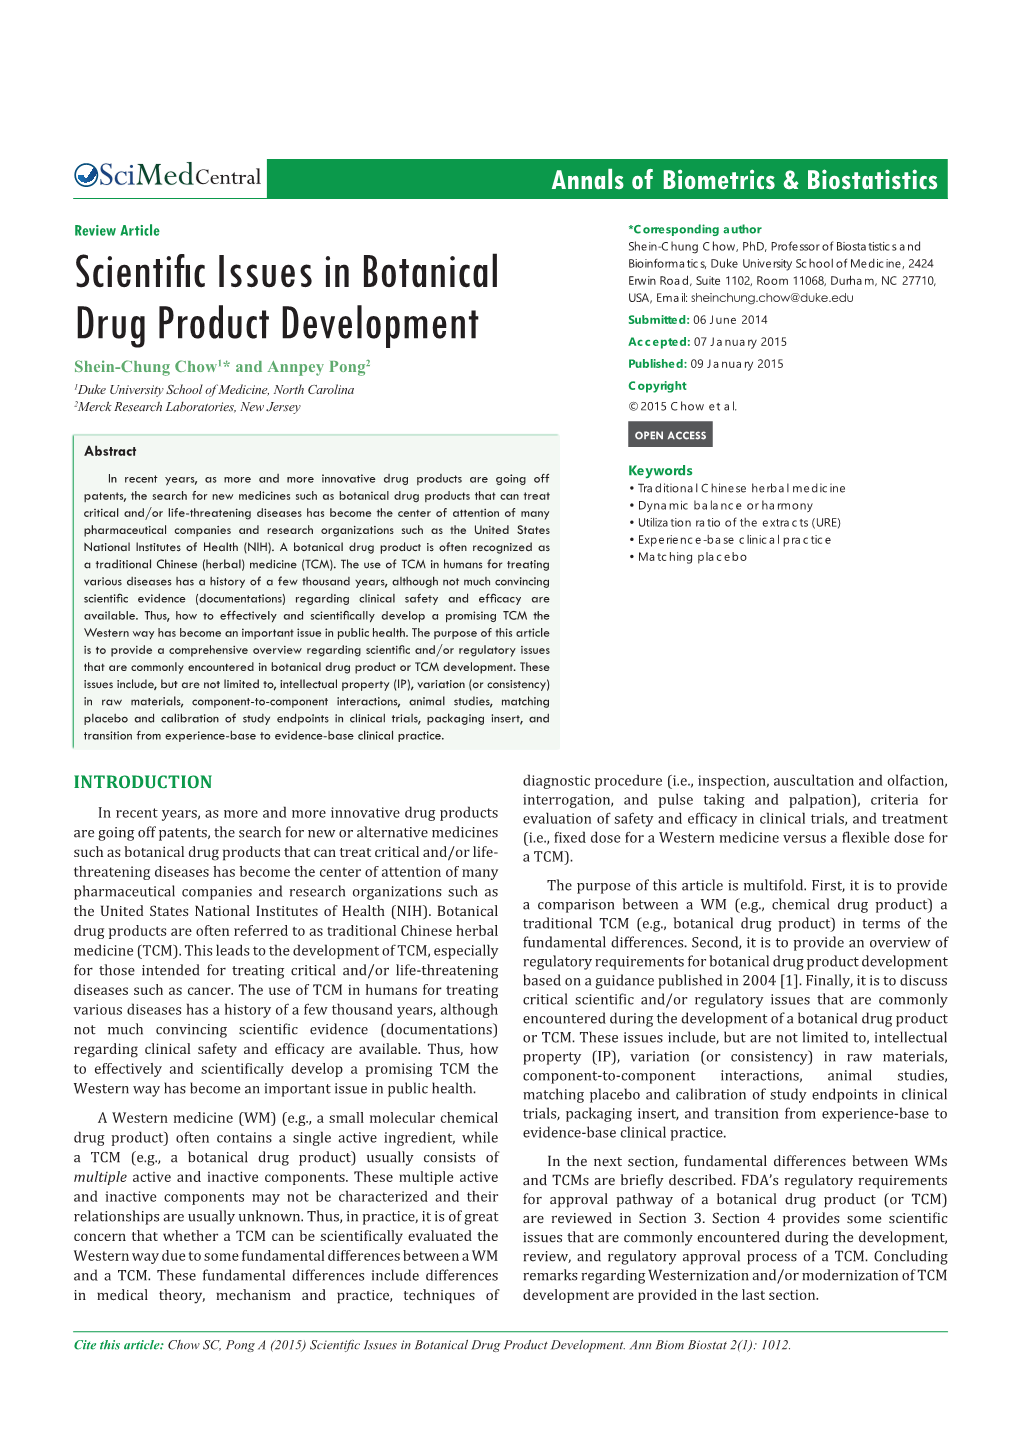 Scientific Issues in Botanical Drug Product Development